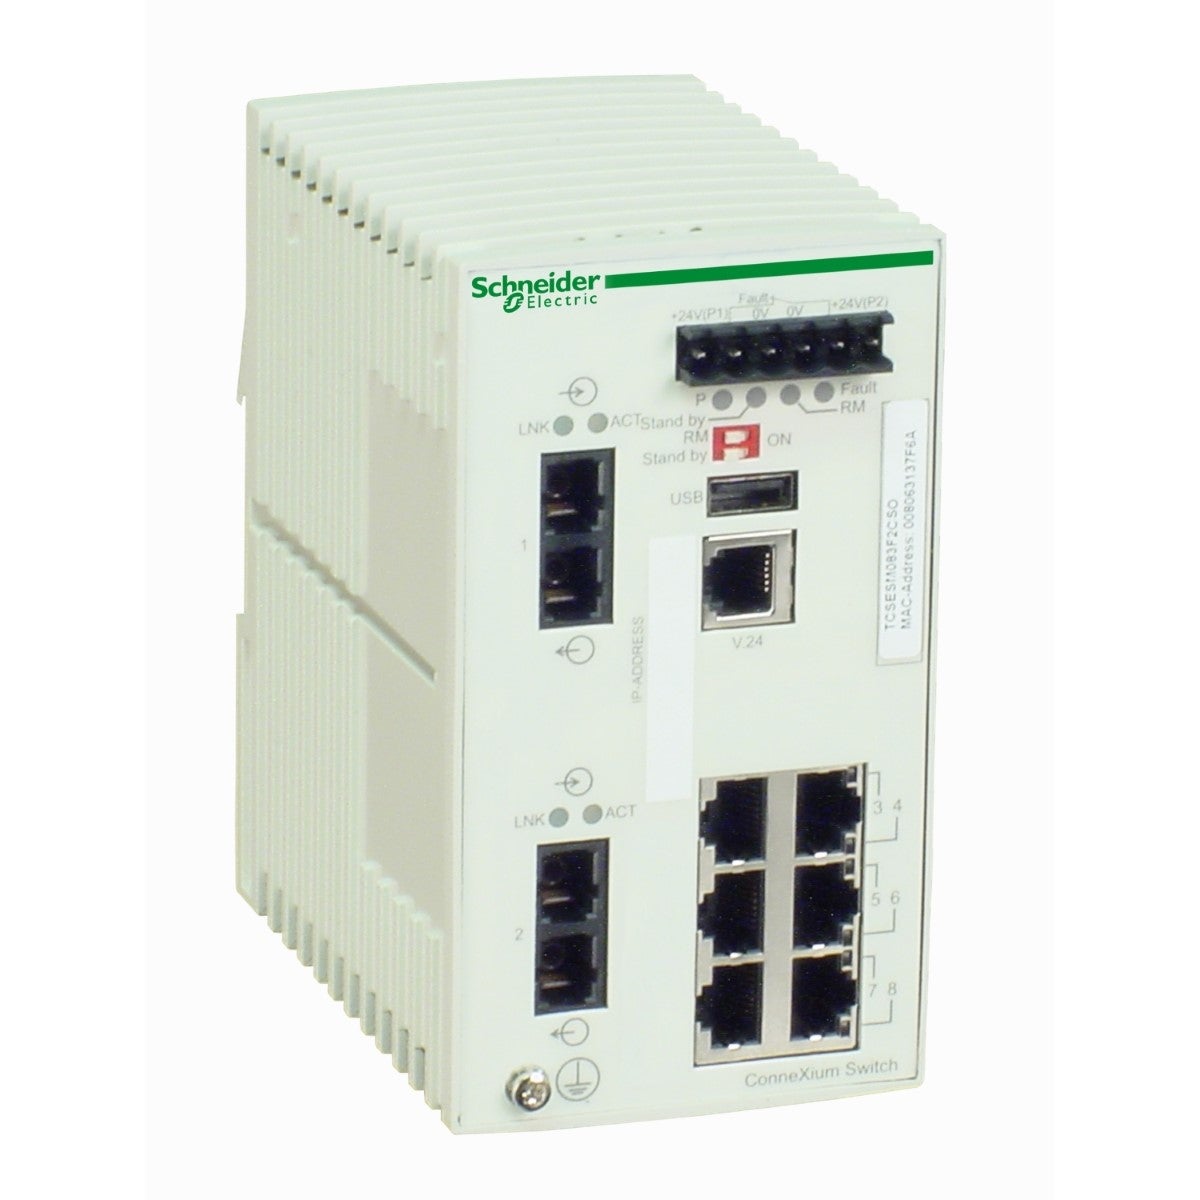 ConneXium Managed Switch - 6 ports for copper + 2 ports for fiber optic multimode